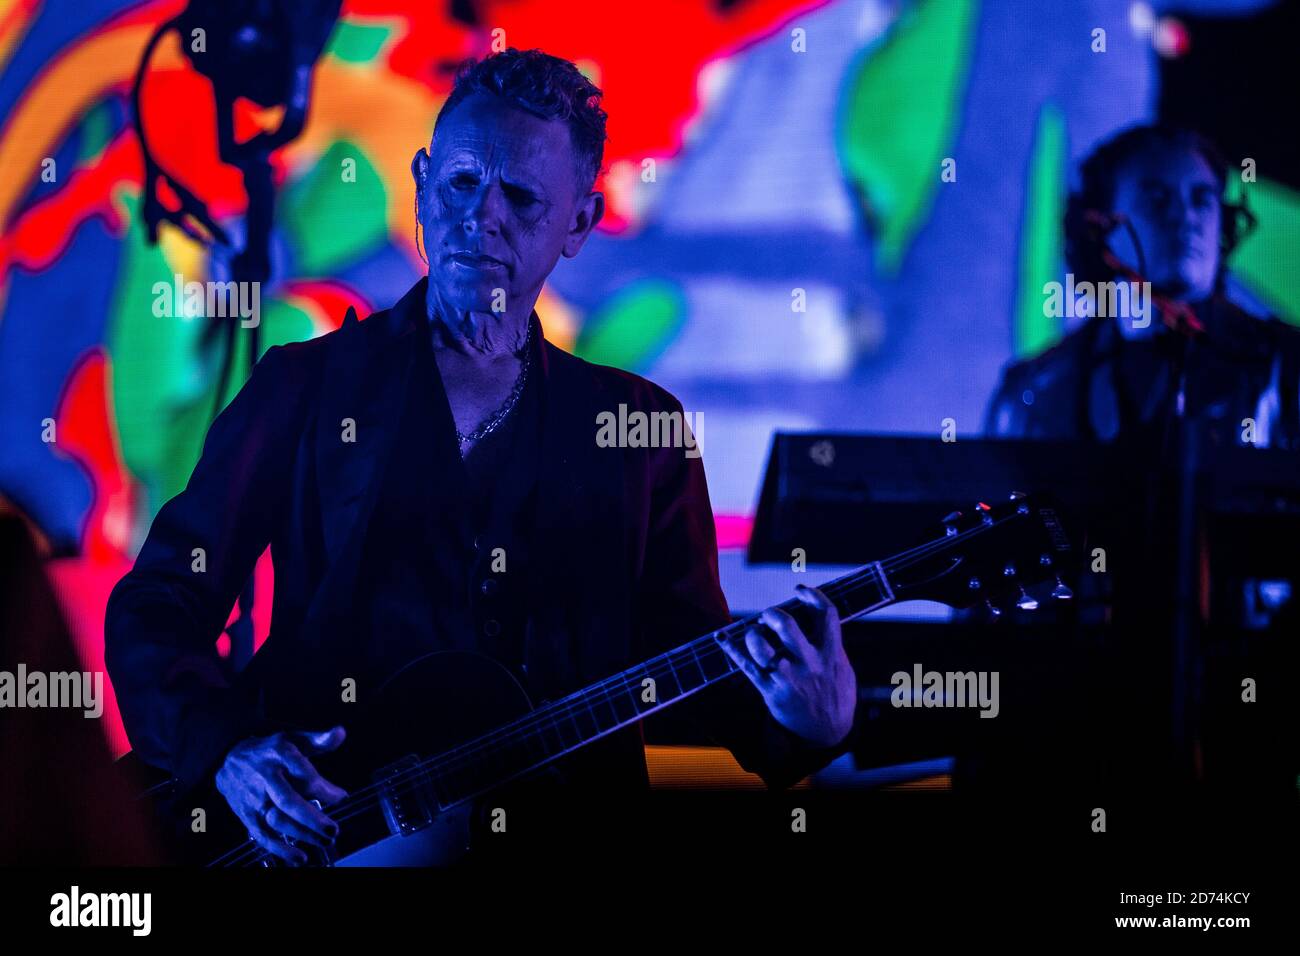 Copenhagen, Denmark. 31th, May 2017. The English band Depeche Mode performs  a live concert at Telia Parken in Copenhagen. Here guitarist Martin Gore is  seen live on stage. (Photo credit: Gonzales Photo -